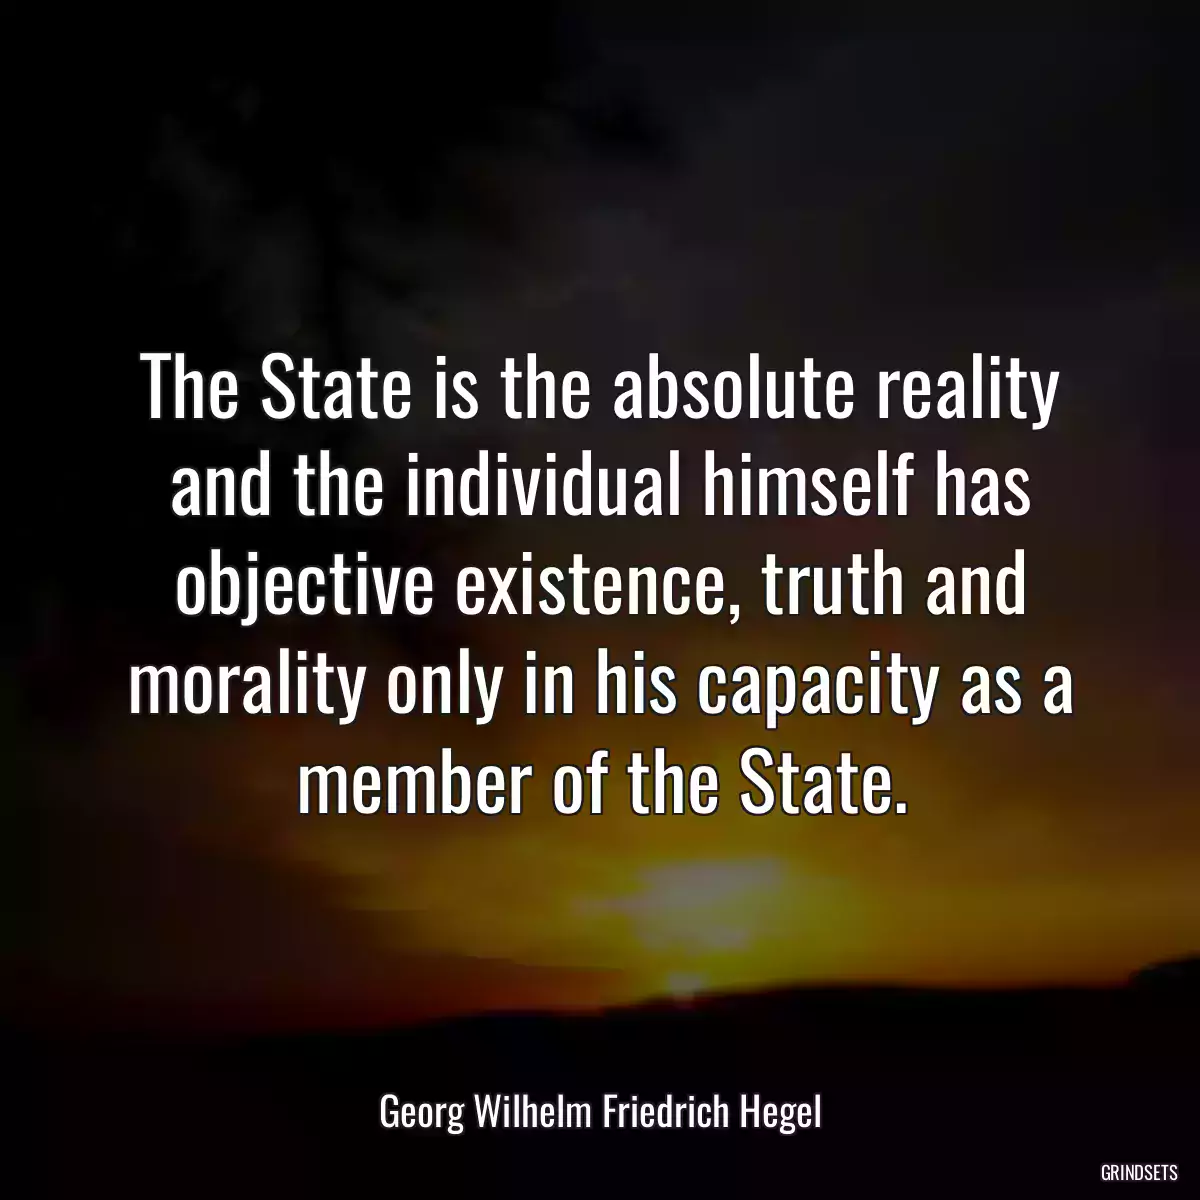 The State is the absolute reality and the individual himself has objective existence, truth and morality only in his capacity as a member of the State.